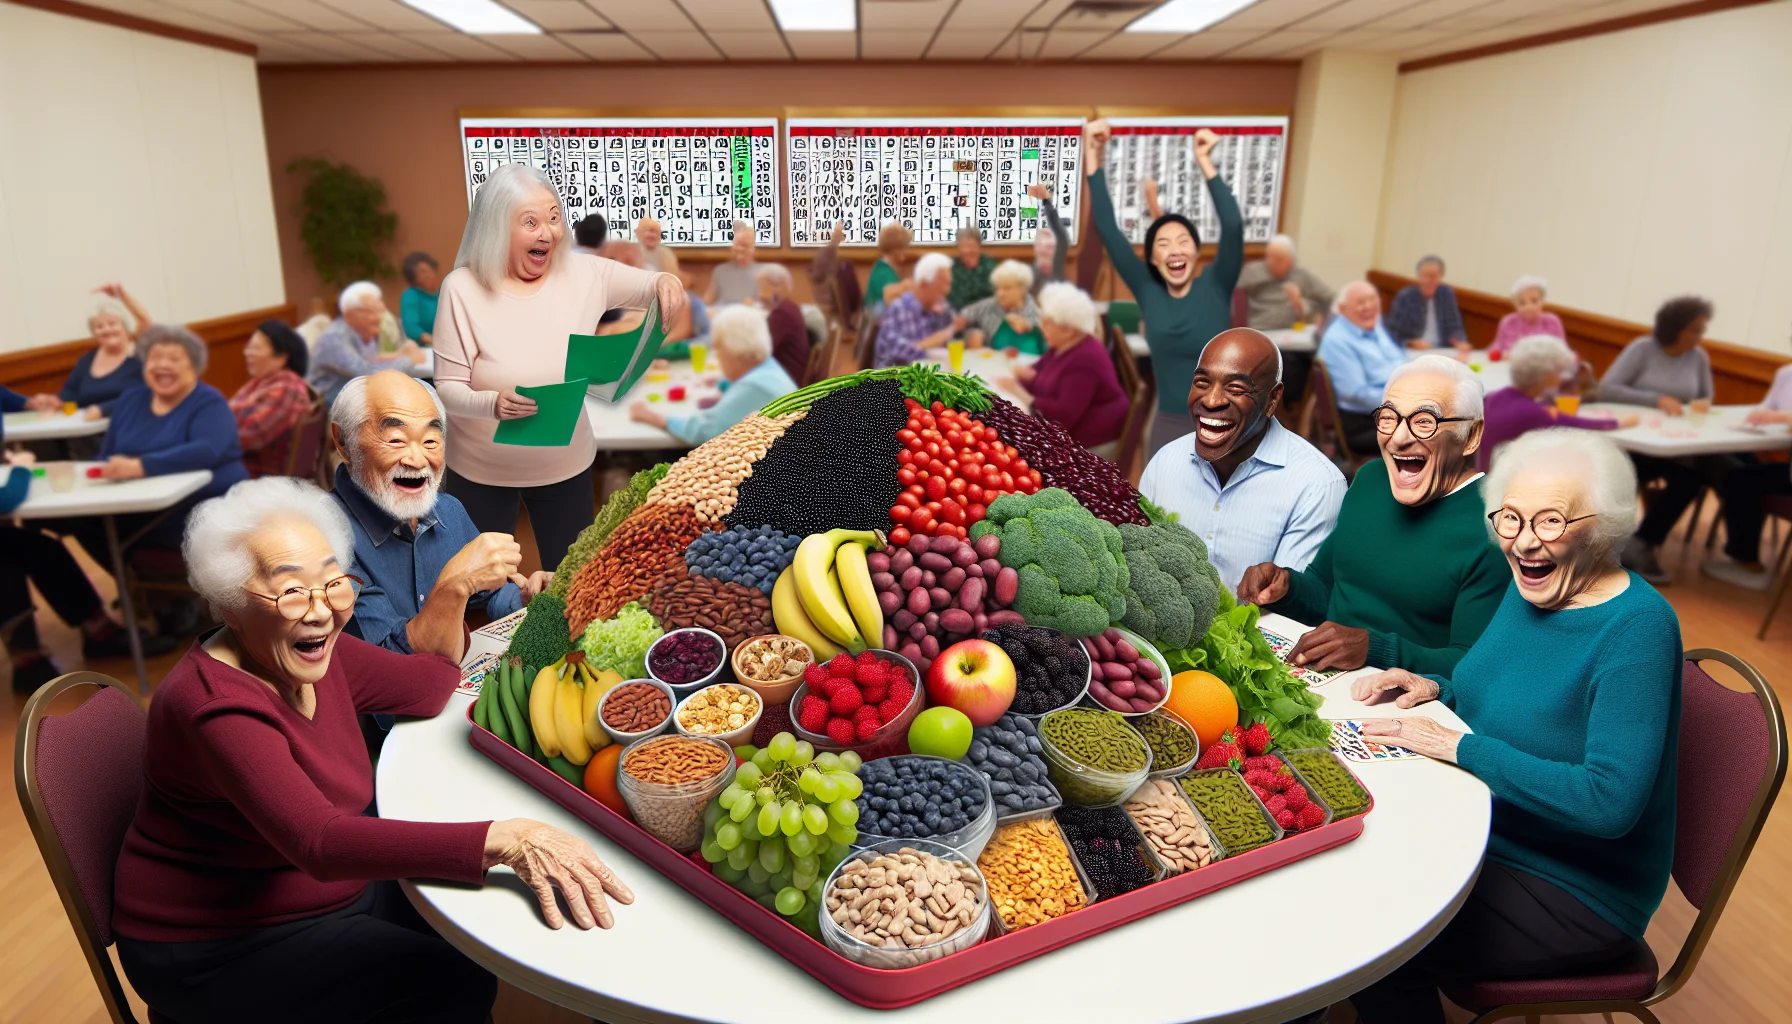 Imagine an absurdly humorous scene taking place in a senior citizen's activity center. In the middle of a bustling bingo game, there's a large table heaving with fiber-rich vegan foods. It's filled with various greens, beans, berries, fruits, legumes, whole grains, nuts, seeds, and other plant-based high-fiber foods. There's a funny, playful competition among the elderly Asian gentleman, black woman, and white man to see who can pile their plate up highest with these healthful foods. Everyone's poking fun at the situation, laughing about their 'extreme' healthy diets, and overall, enjoying their unity and vitality in their golden years.